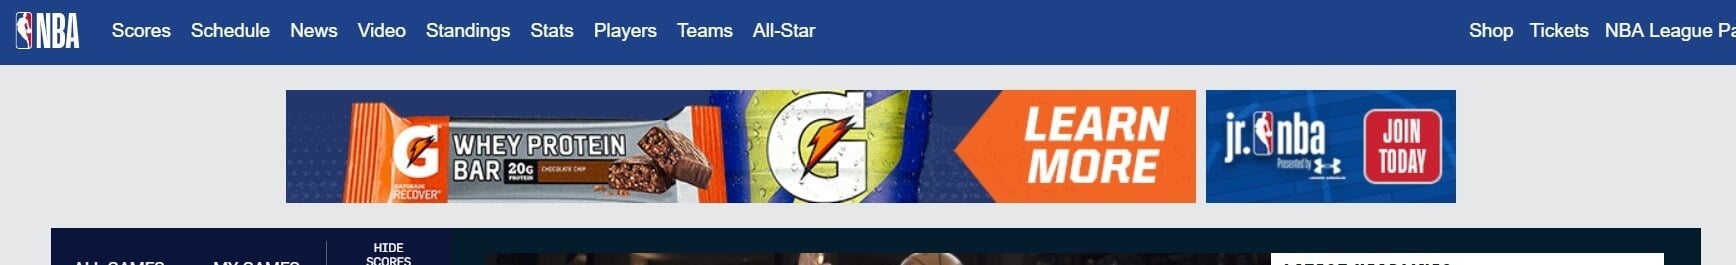 A banner advertisement on the NBA homepage